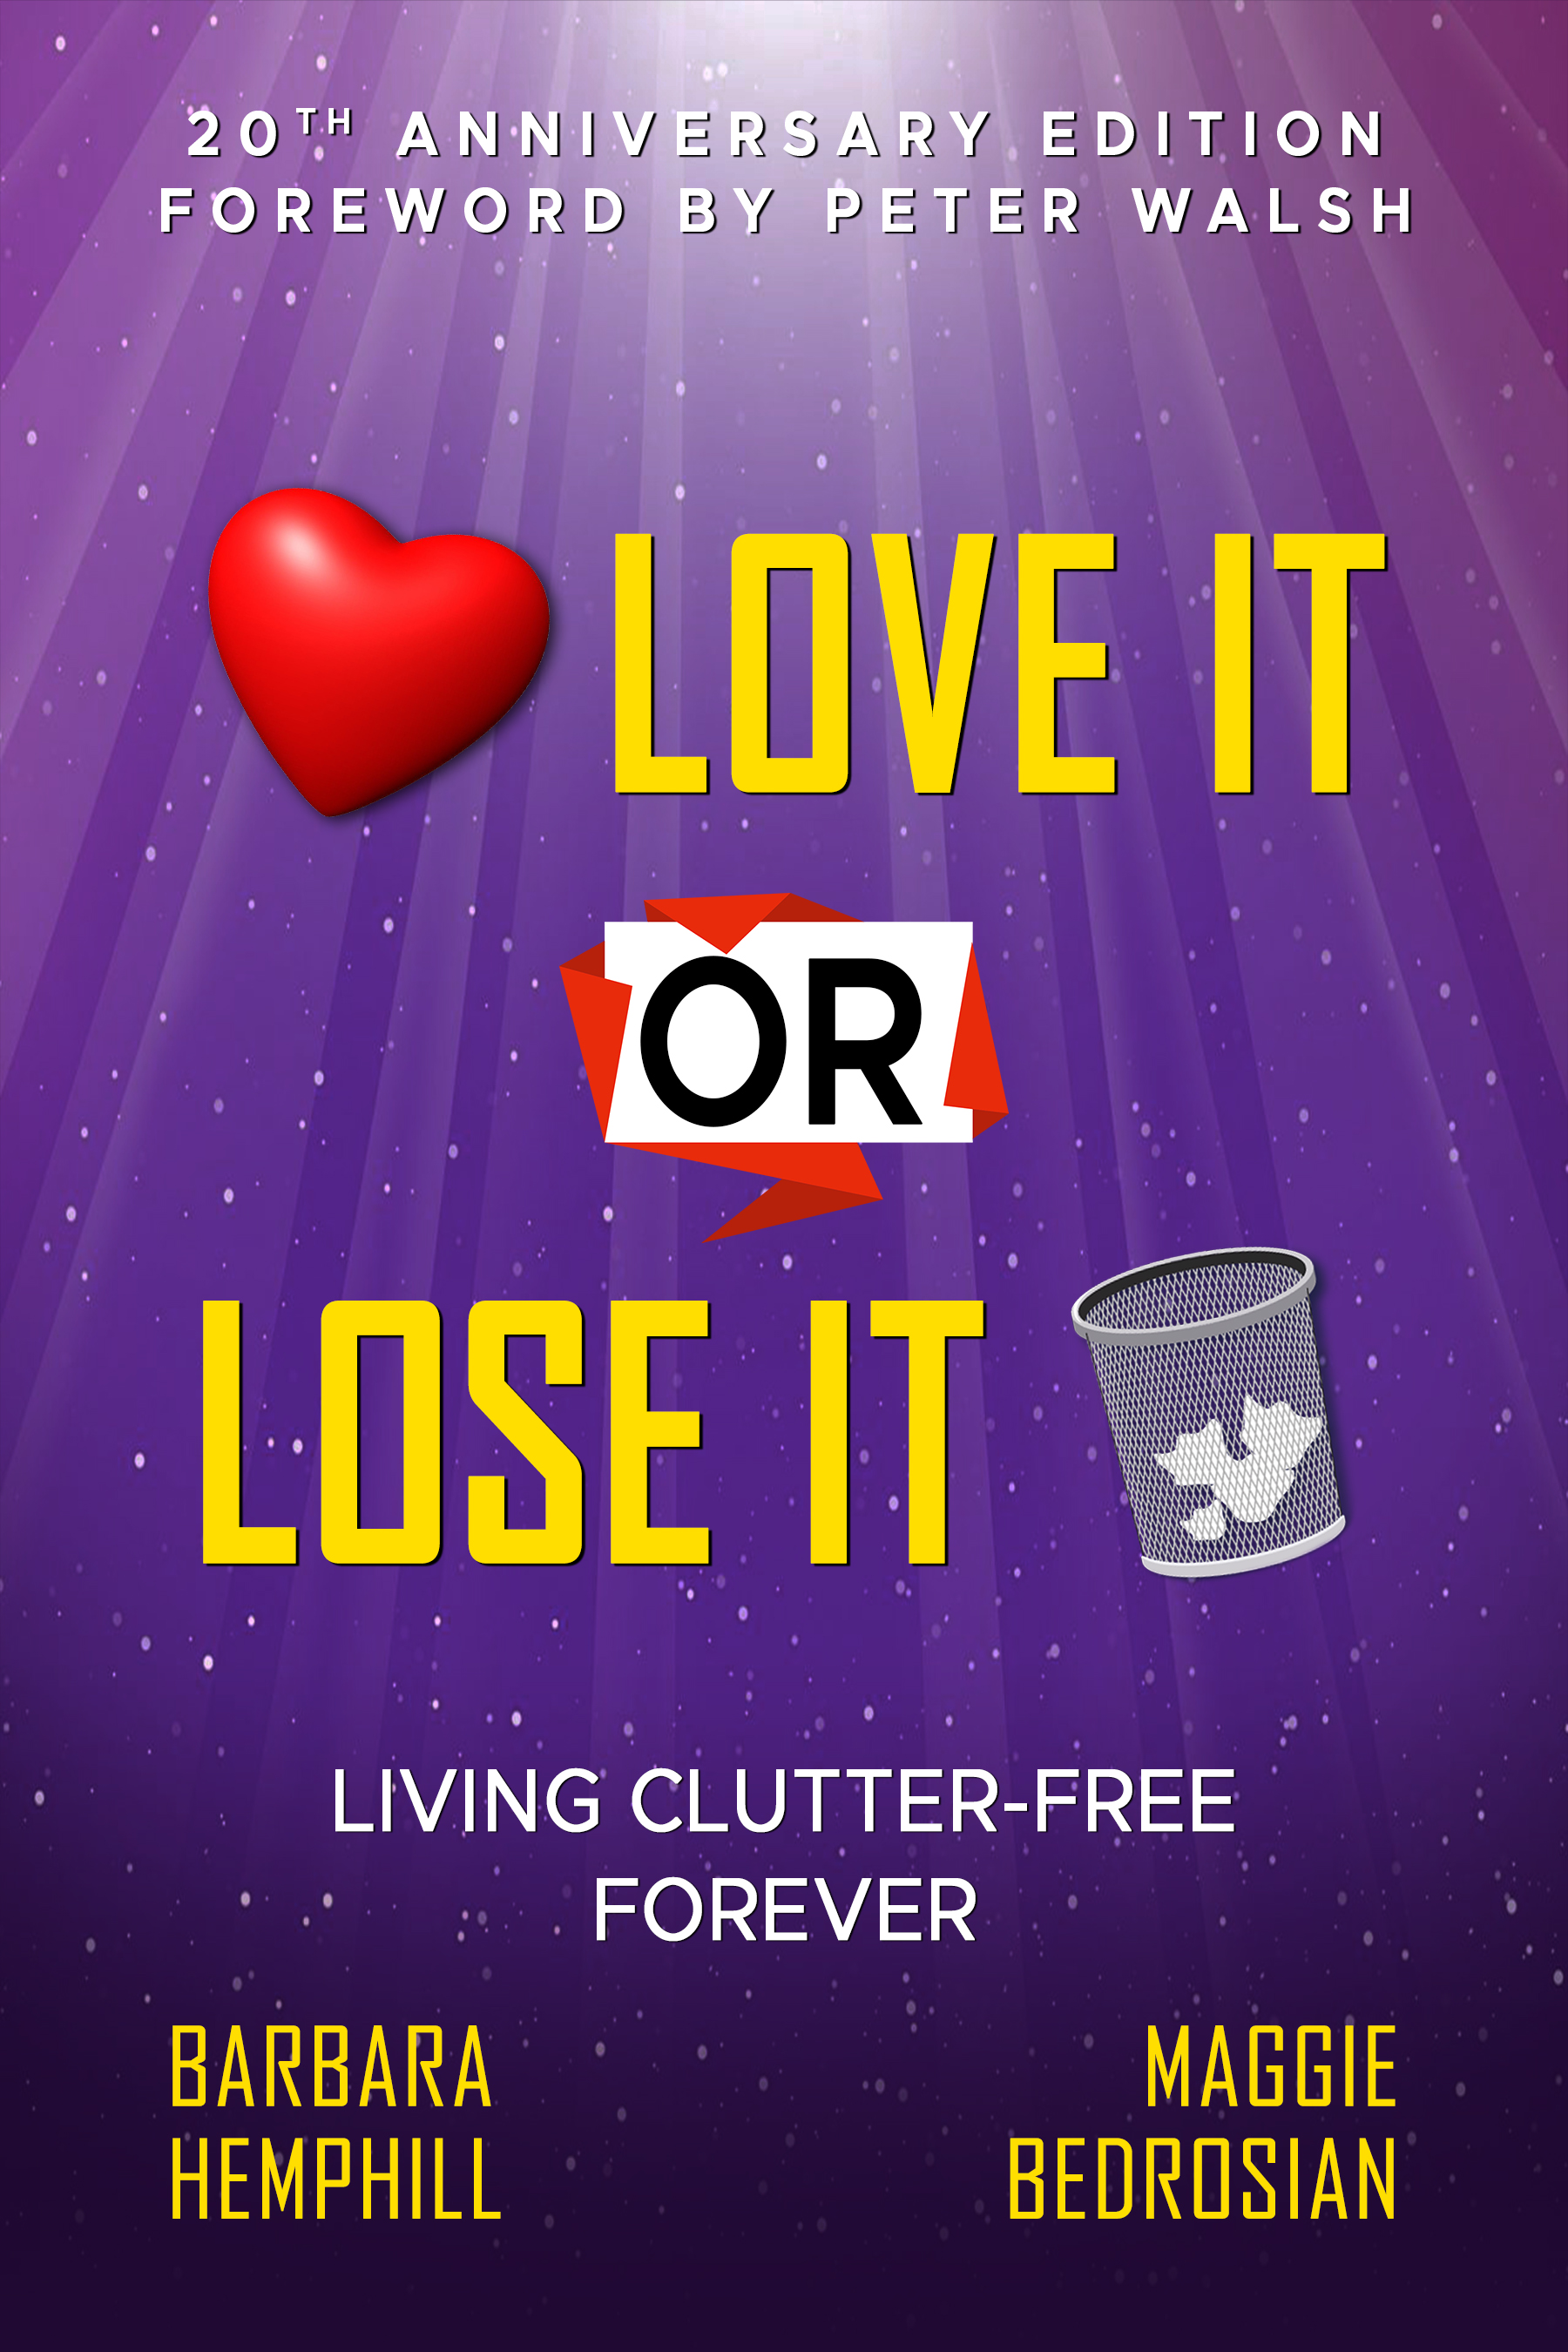 LESS CLUTTER More Life: A Life's Teachings